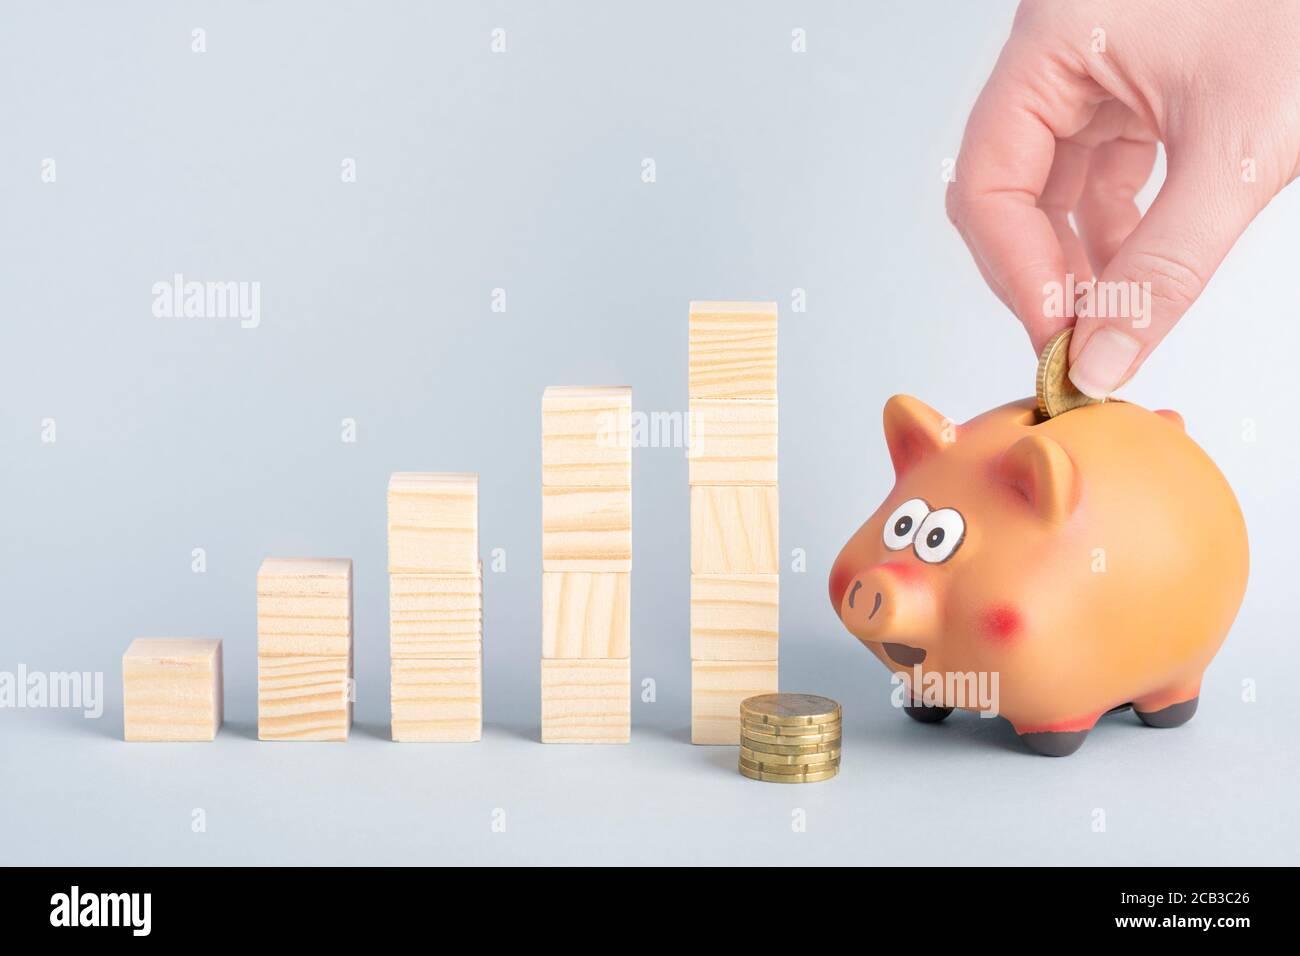 A hand puttiing a coin into a piggy bank and growth graph concept from wooden blocks Stock Photo